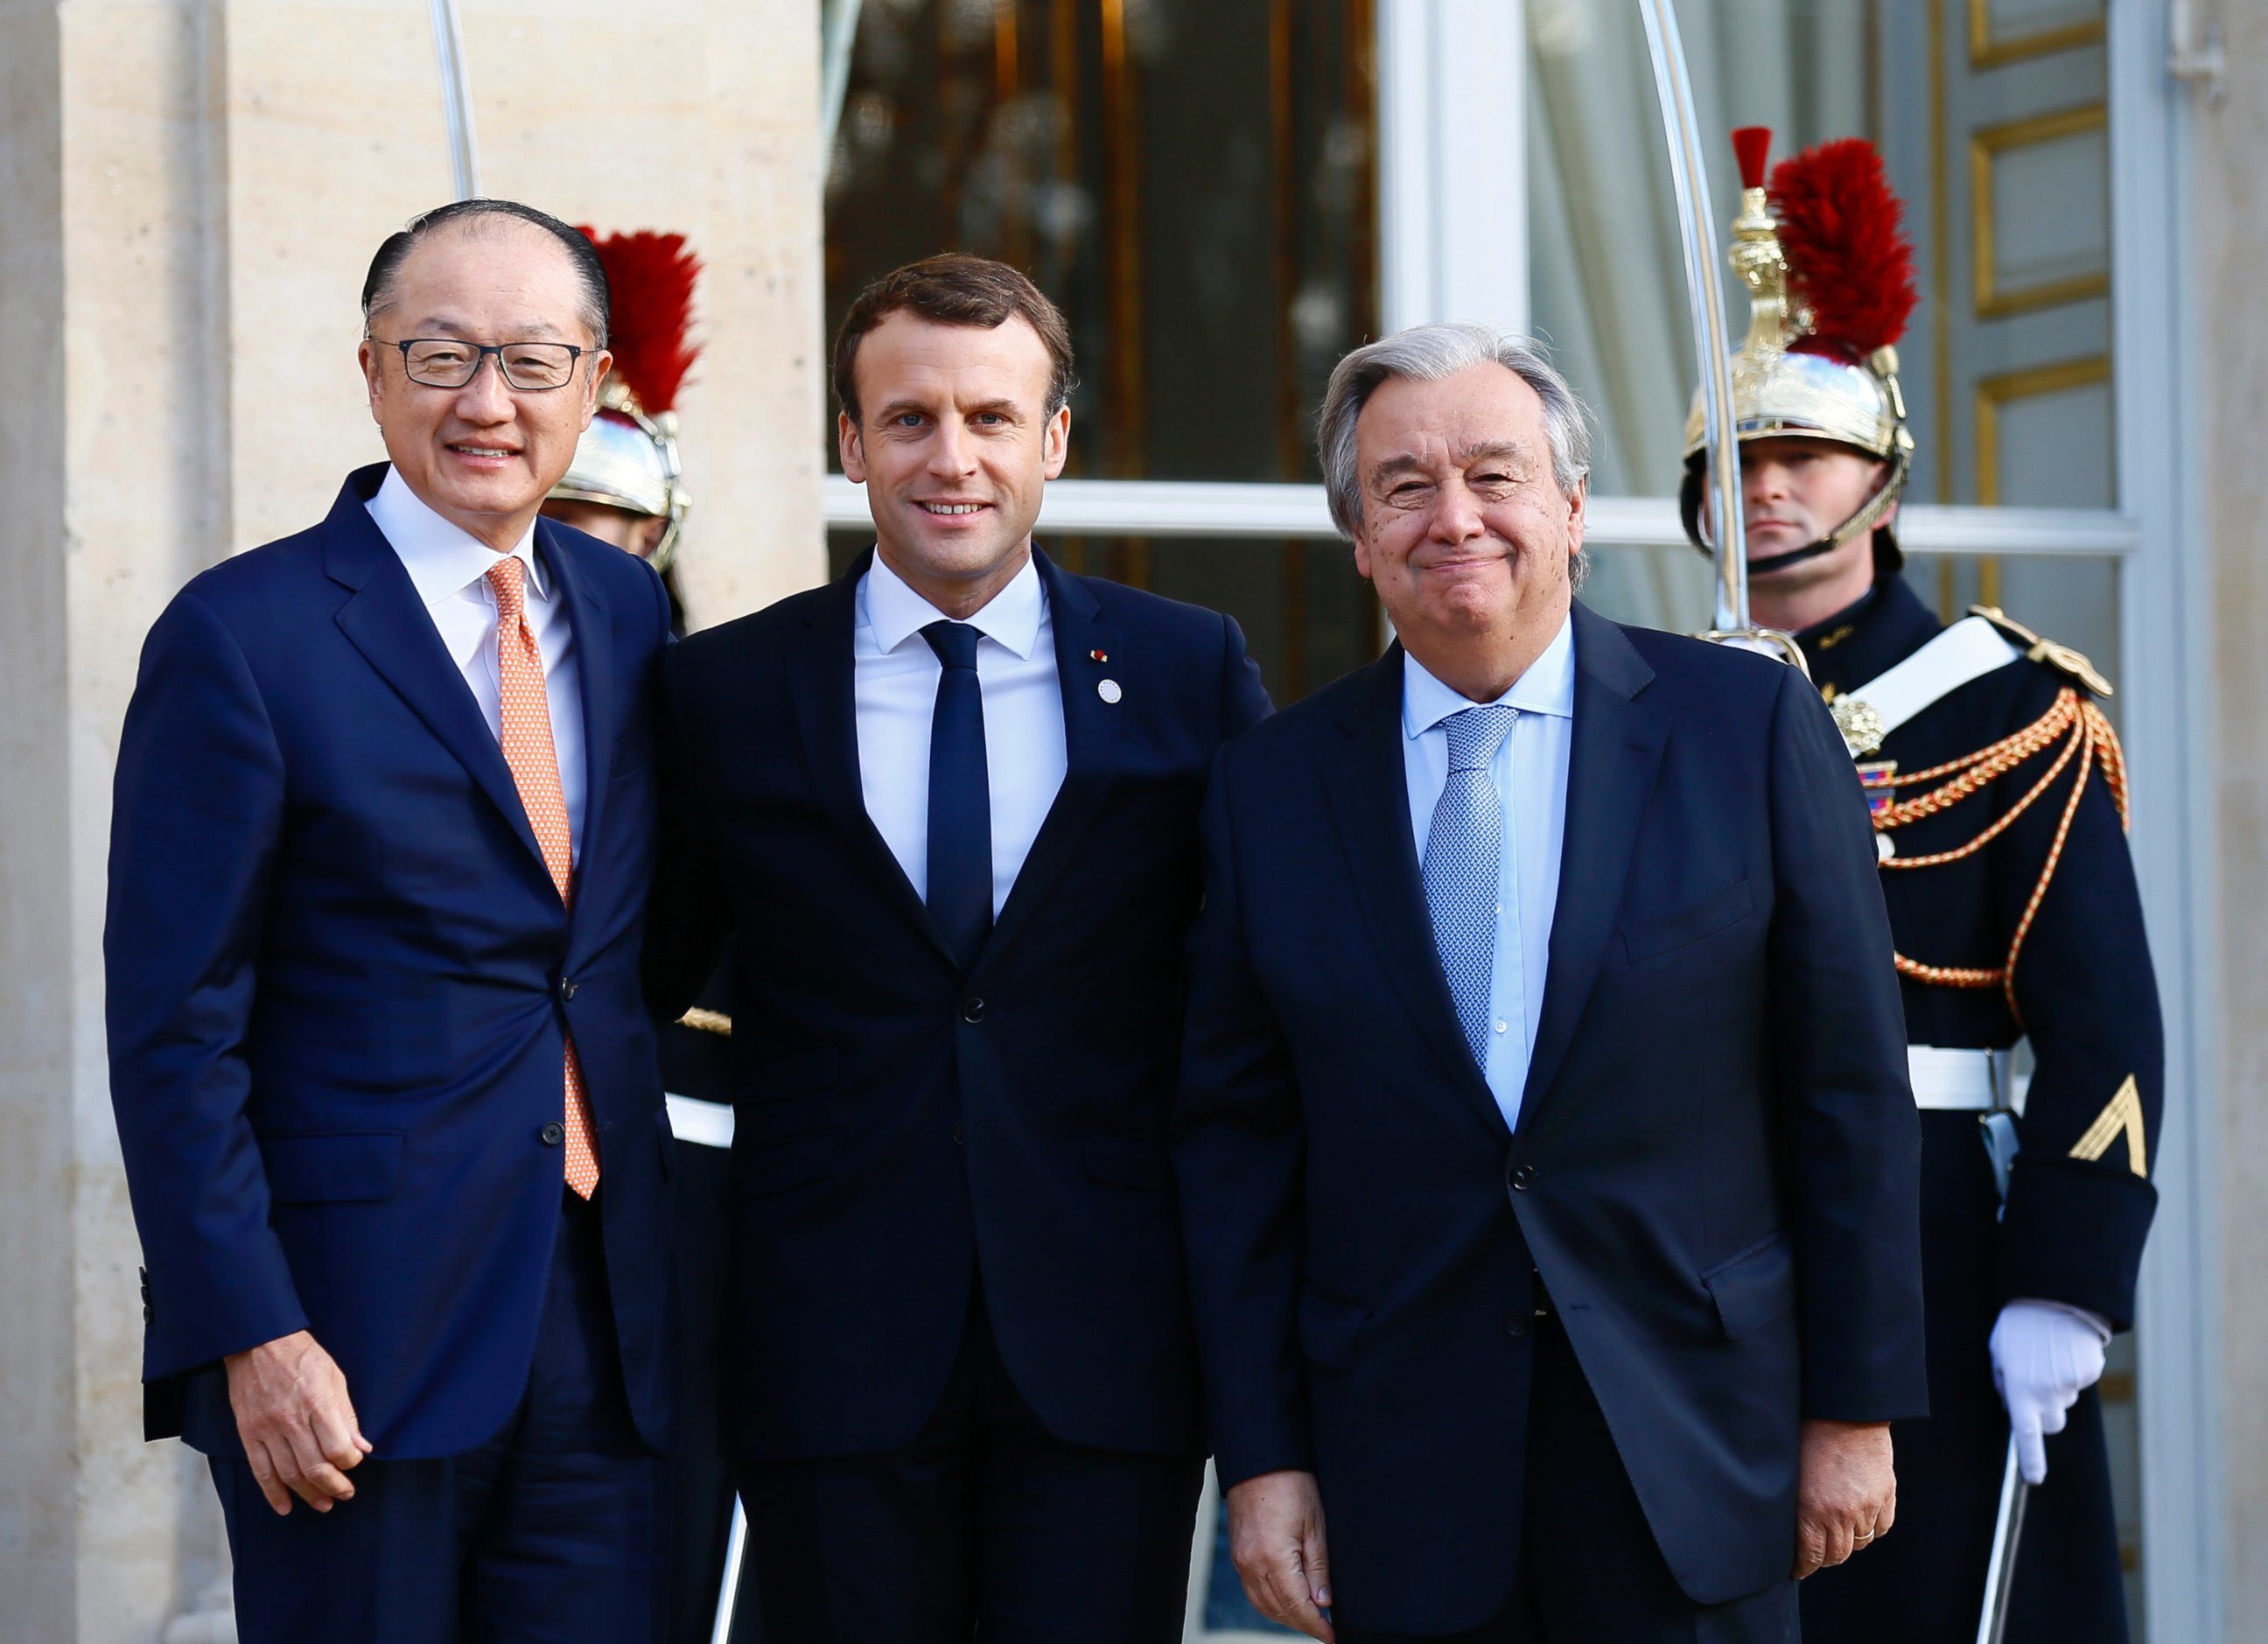 French President Emmanuel Macron attends a meeting with World Bank President Jim Yong Kim and United Nations (UN) Secretary General Antonio Guterres at the Elysee Palace as part of the One Planet Summit in Paris, France, December 12, 2017.